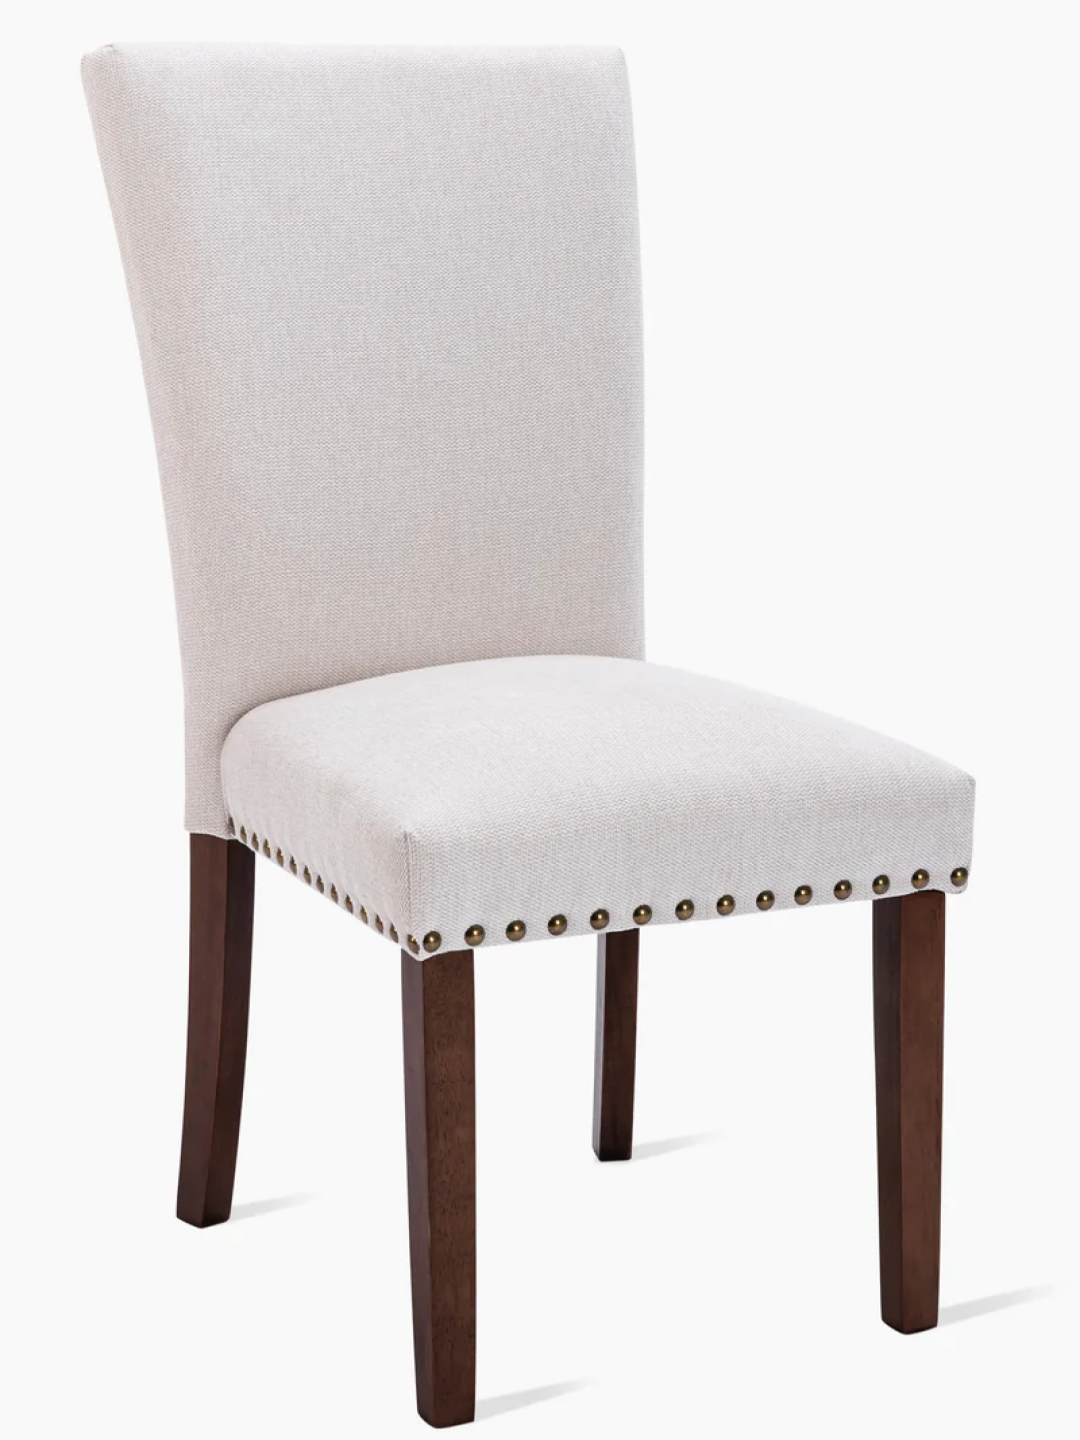 Dining Chair with Nailhead Trim - A420